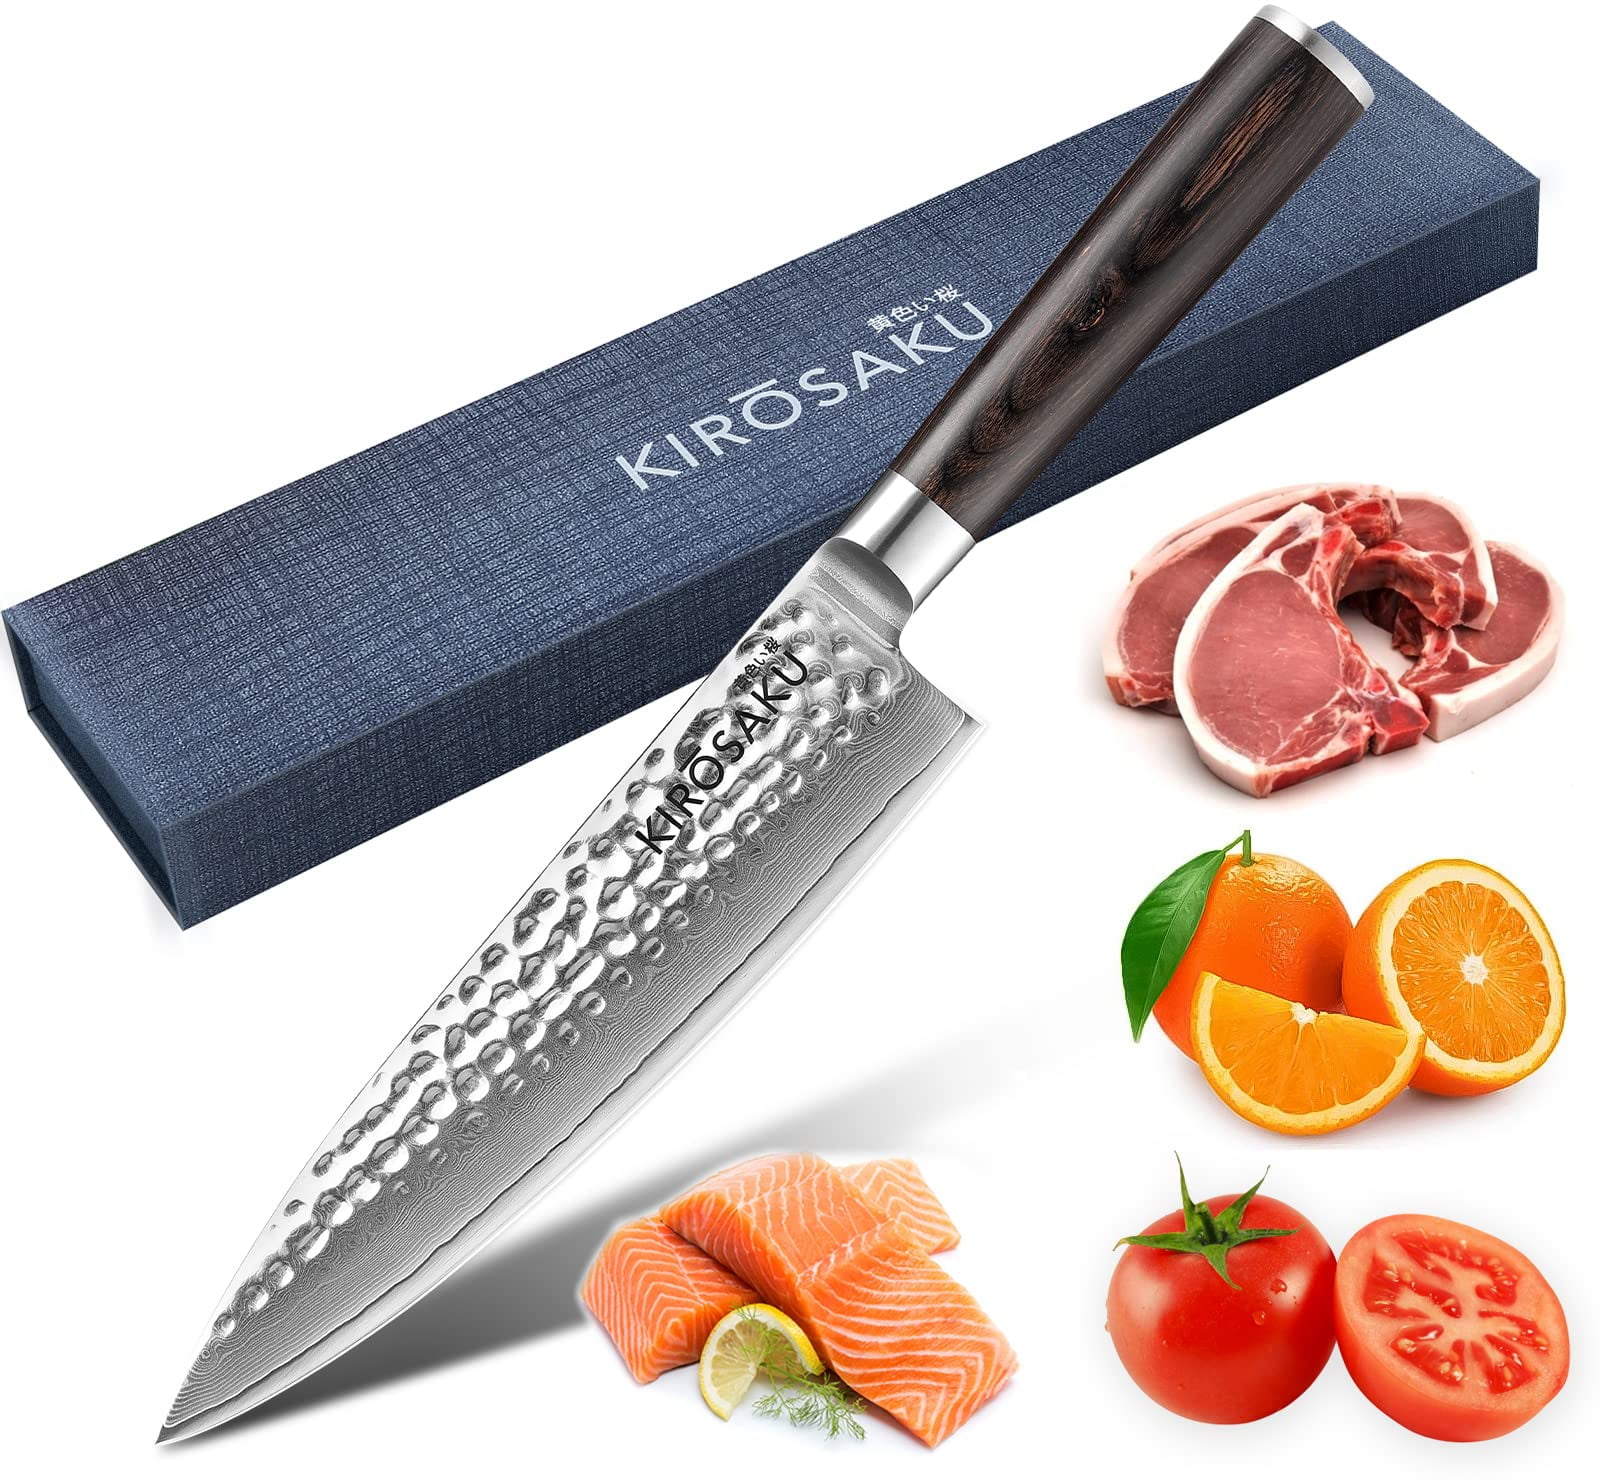 Prime Damascus Chef Knife, Sharp Kitchen Knives, Professional Meat Cutting Knife for Chefs, Best Handmade Gift (Rose Wood with Spacer) (Rose Wood)